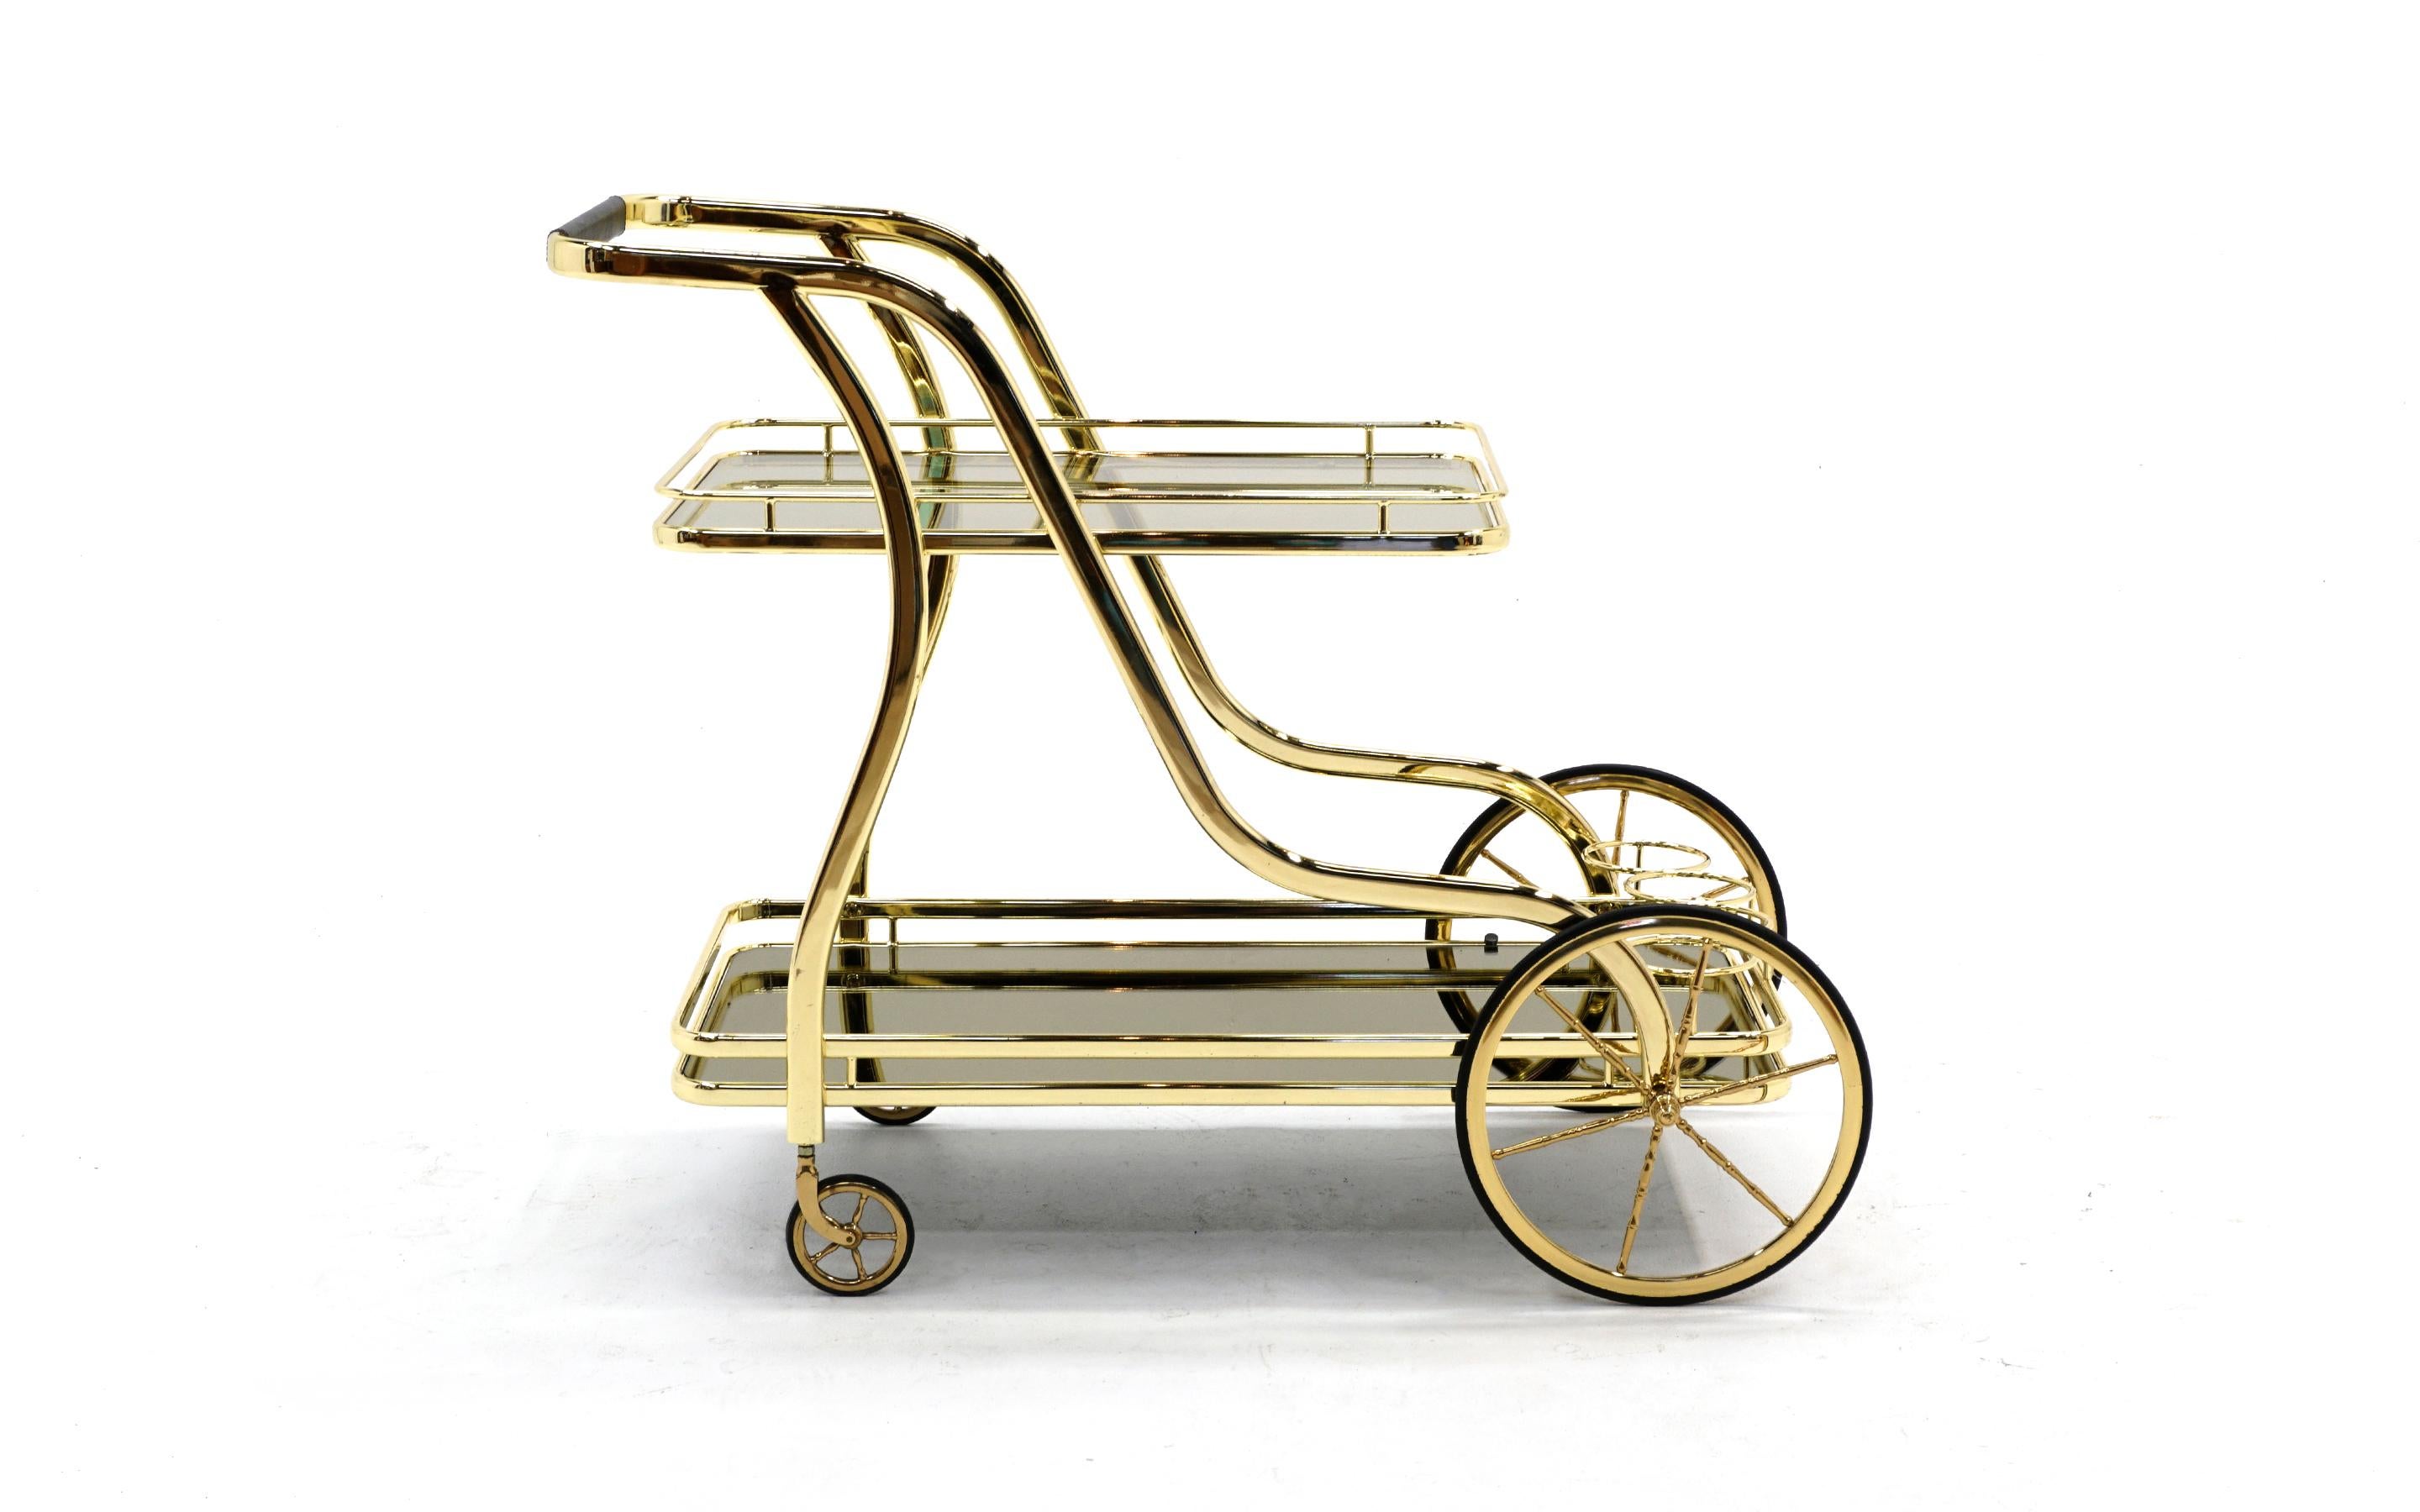 Serving / bar cart in brass with a clear glass top shelf and bronze mirrored glass lower shelf. This creates striking visual effect. Large front wheels with rubber tires and small rear wheels. Ready to use.